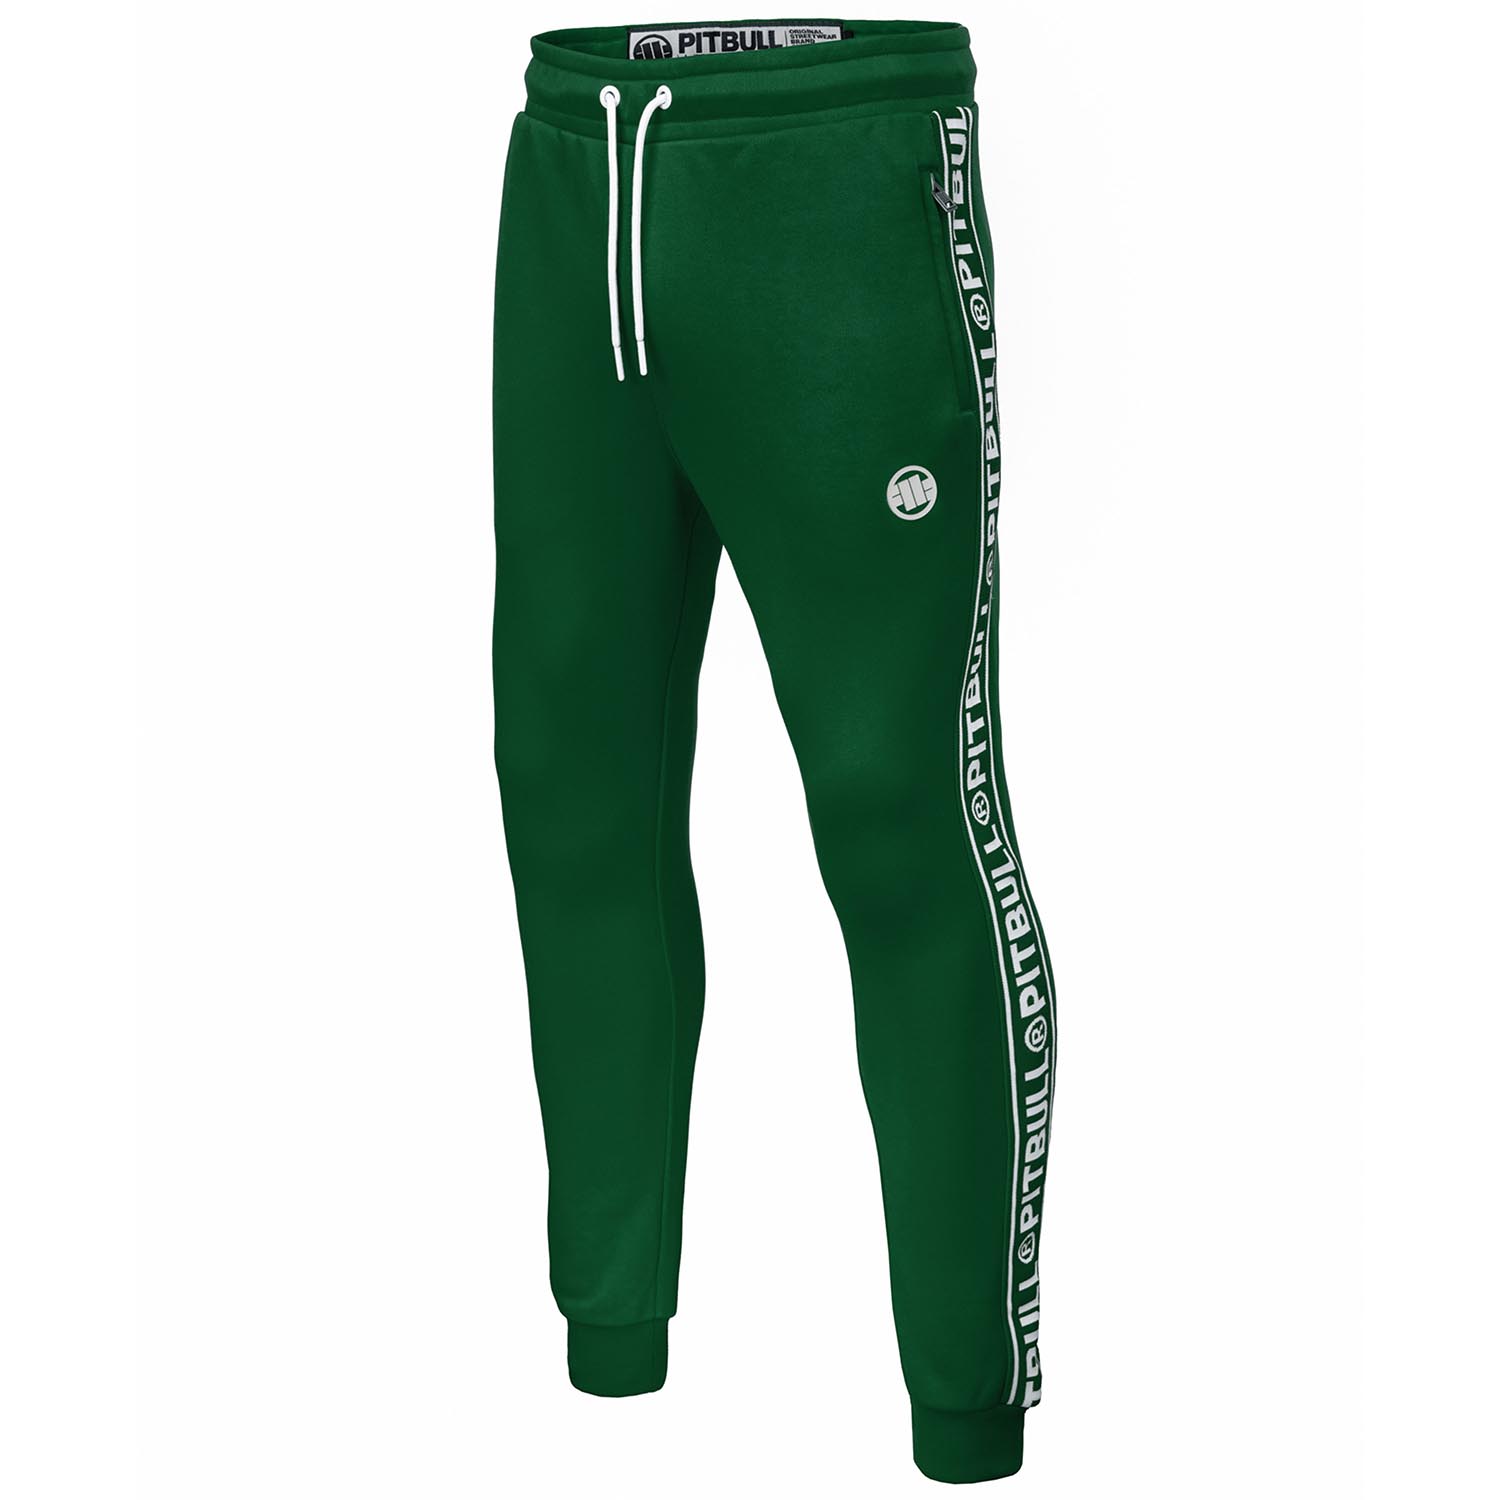 Pit Bull West Coast Joggers, Tape Logo Terry, green